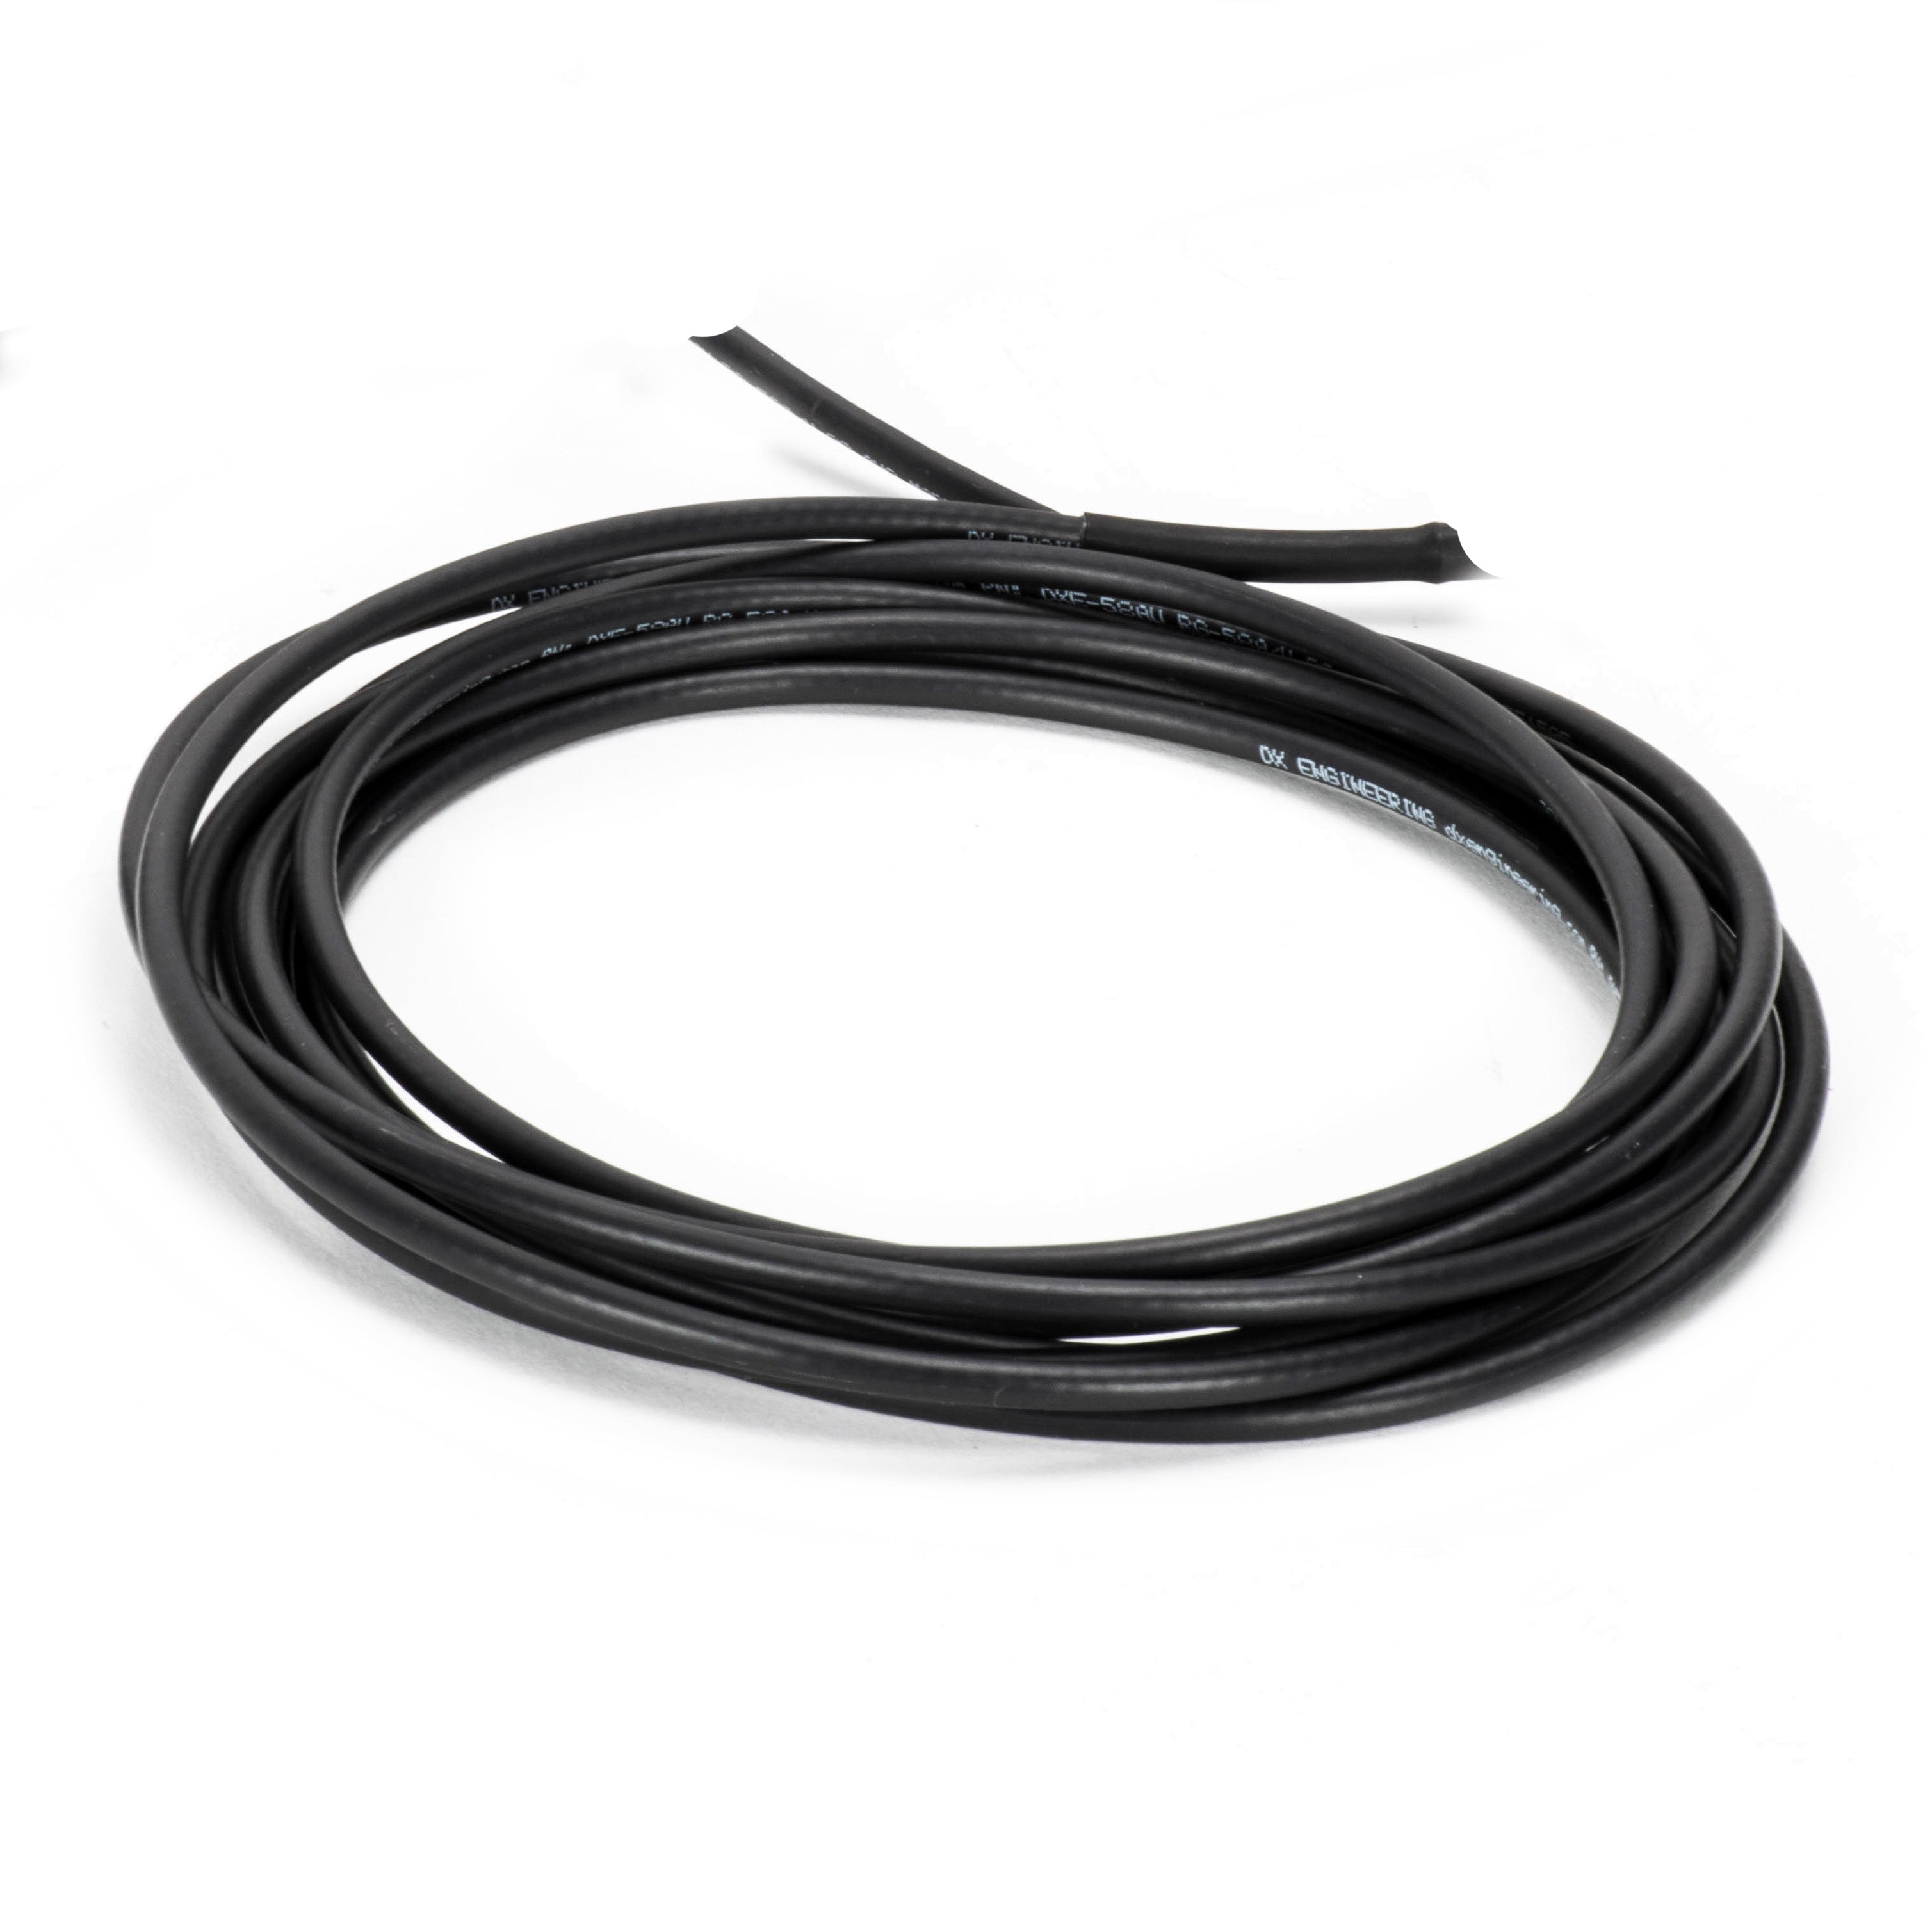 Co-axial Cable for Antenna Mounts